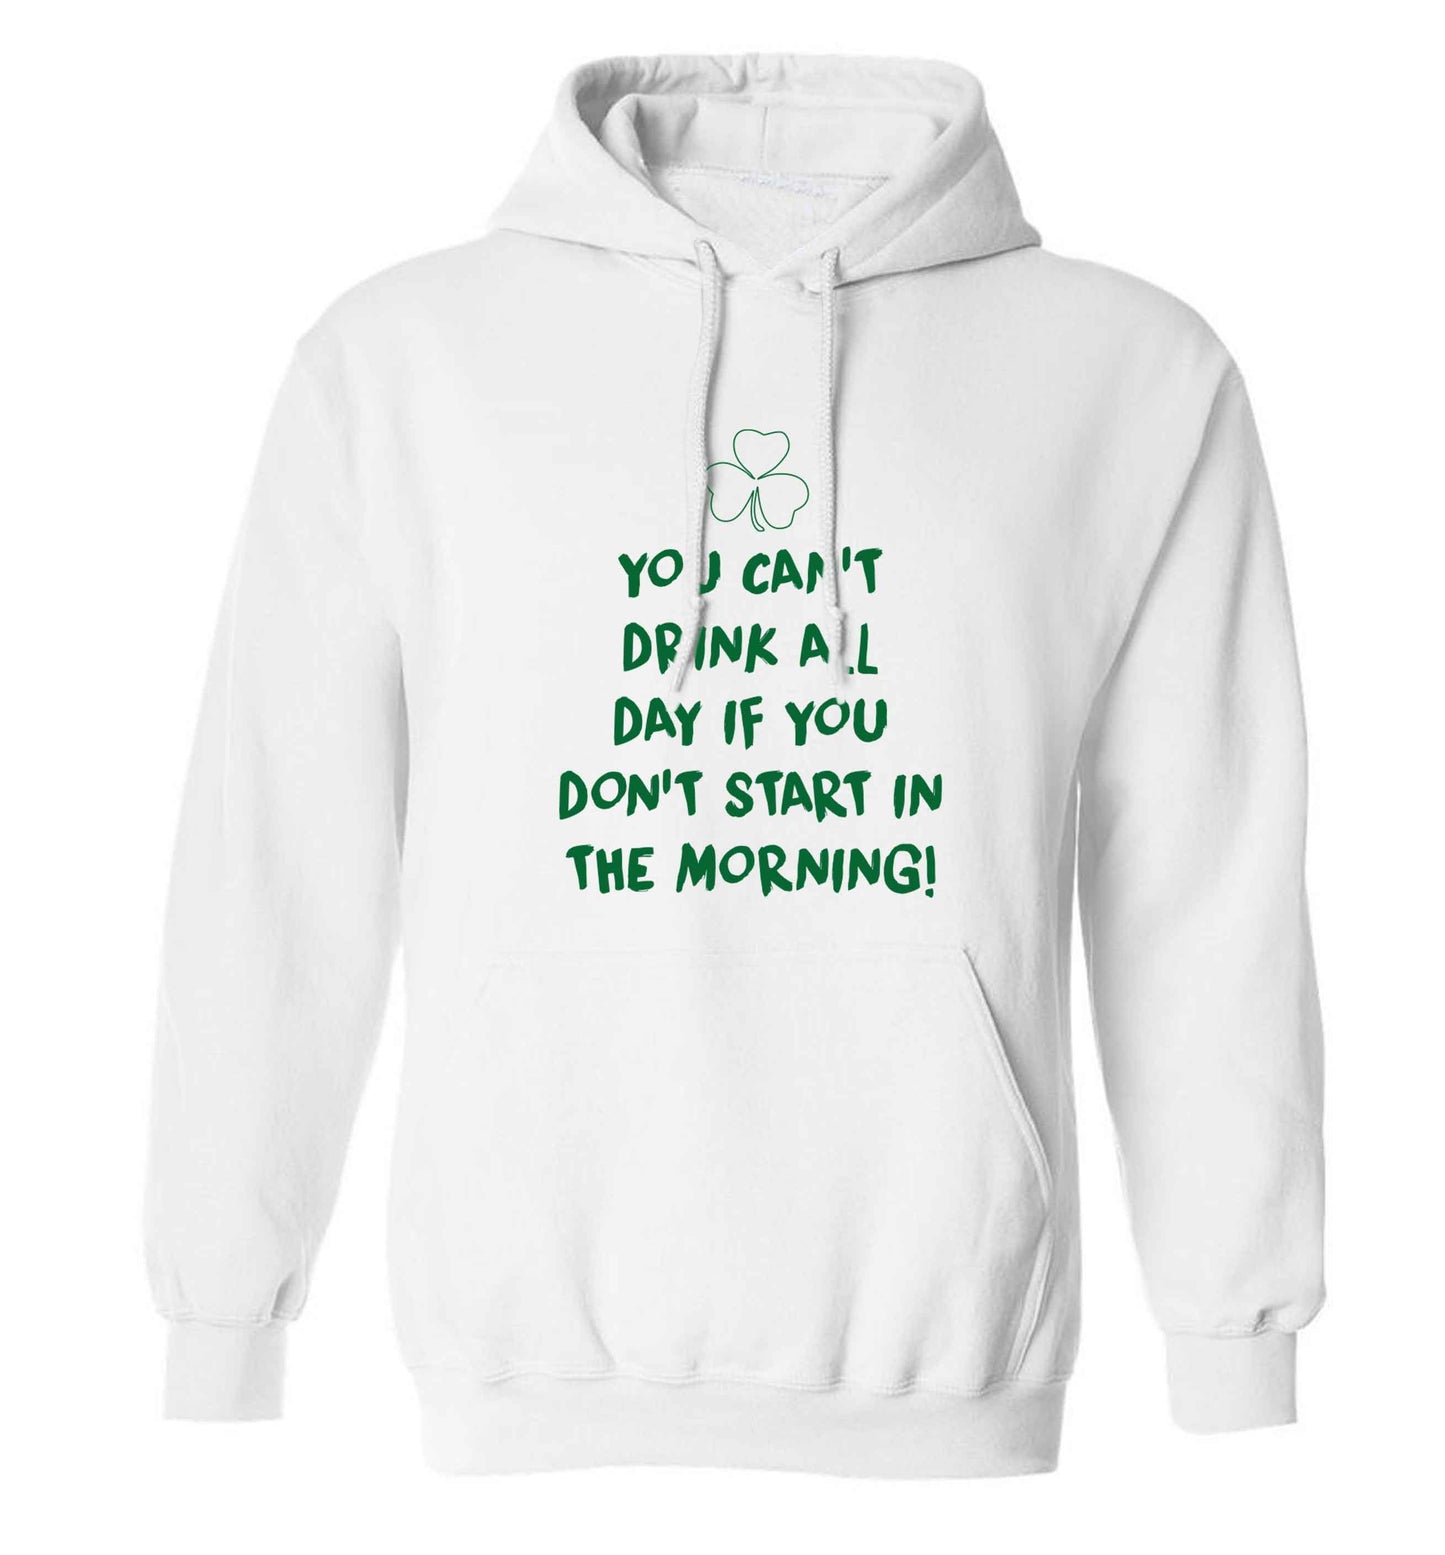 You can't drink all day if you don't start in the morning adults unisex white hoodie 2XL